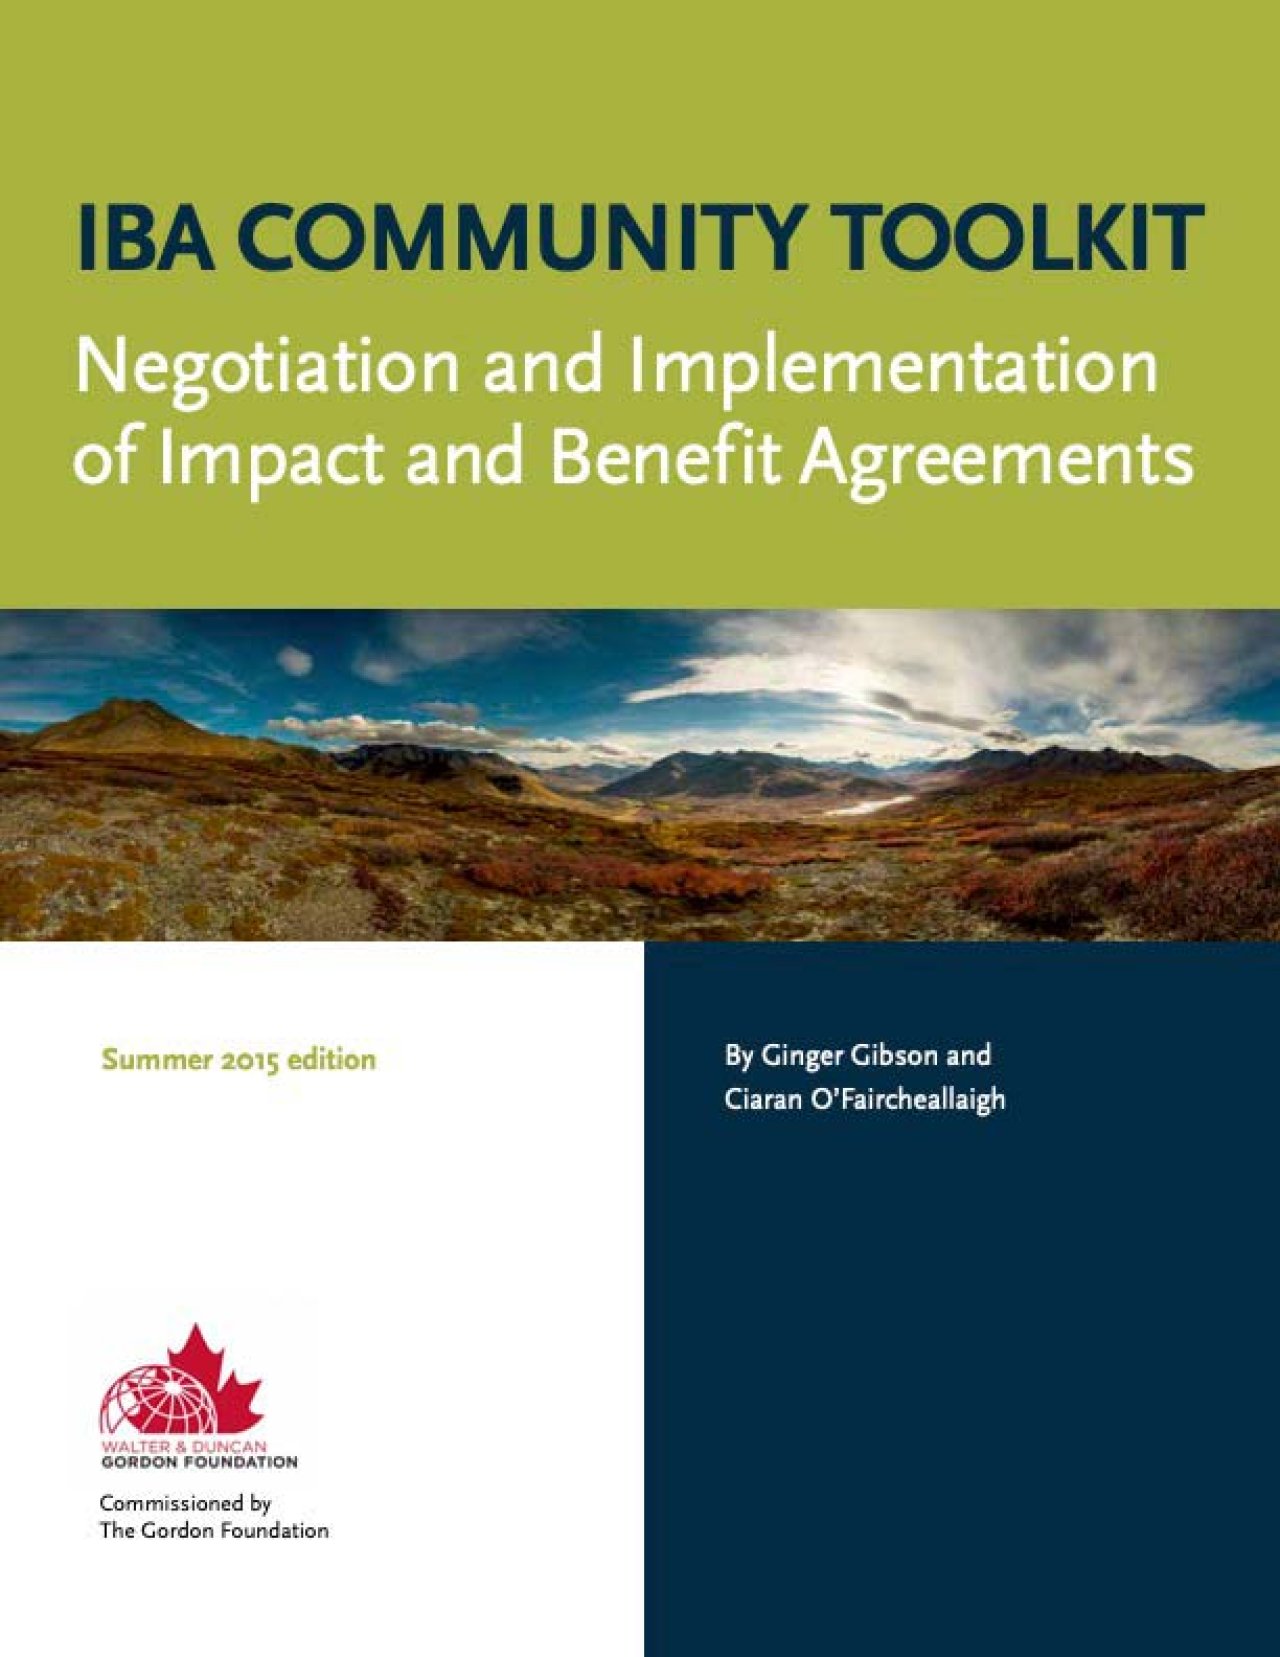 IBA Community Toolkit (2015) Cover